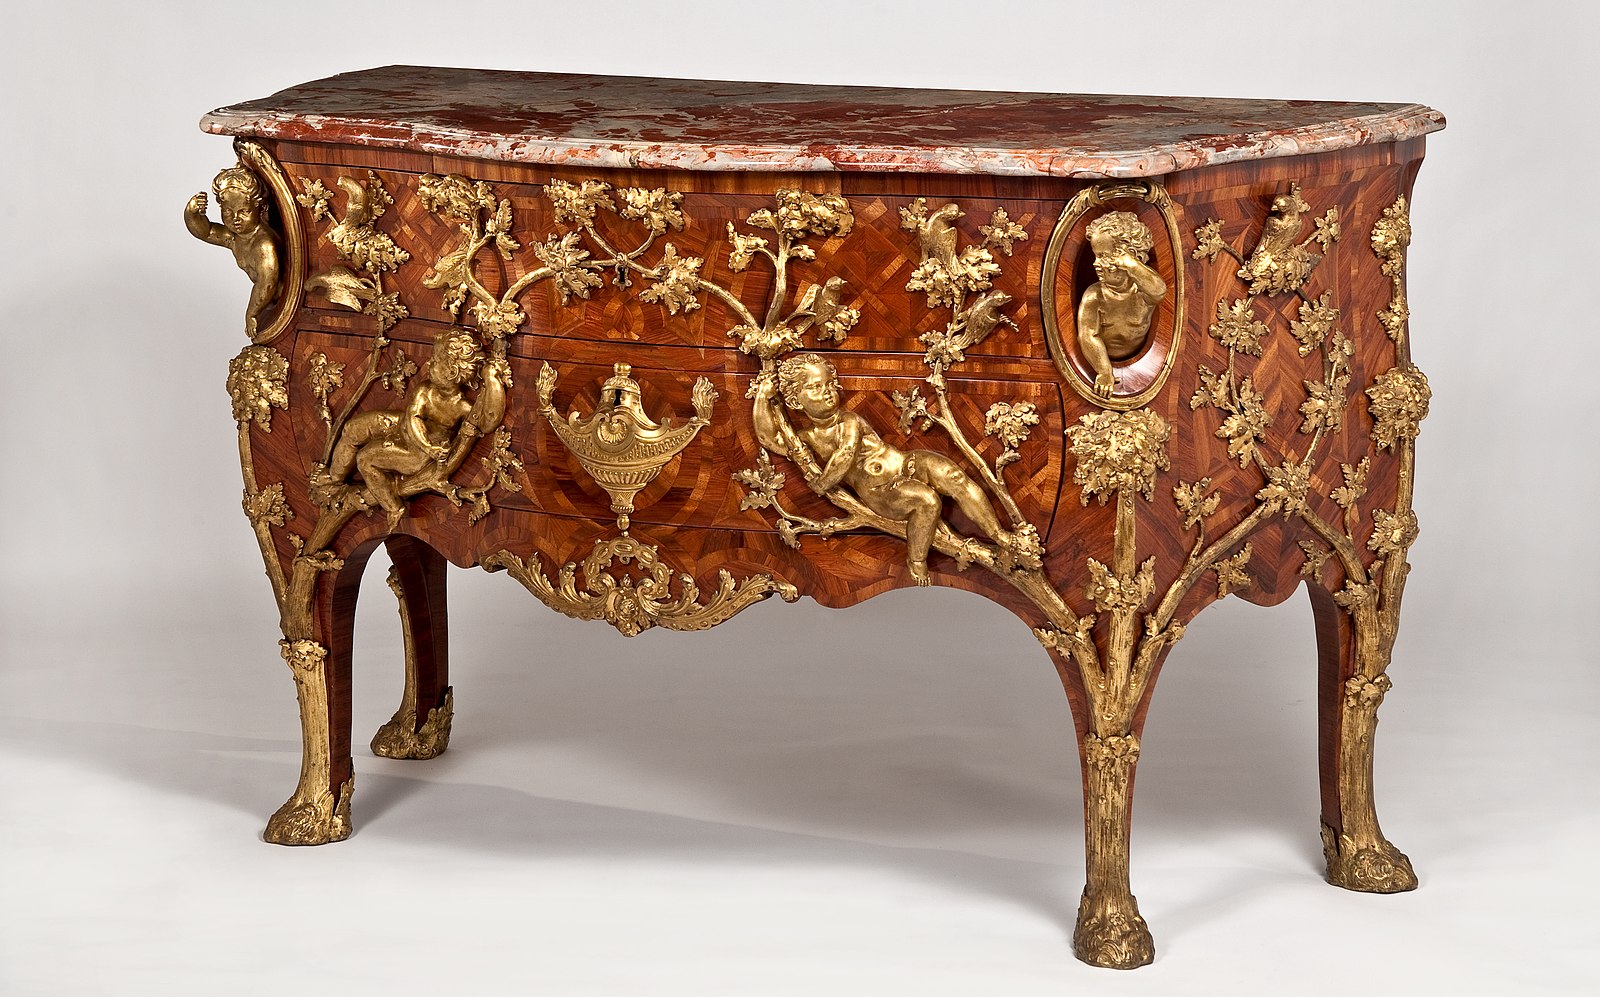 A chest of drawers with ornate gold painted figures with a dark marble top